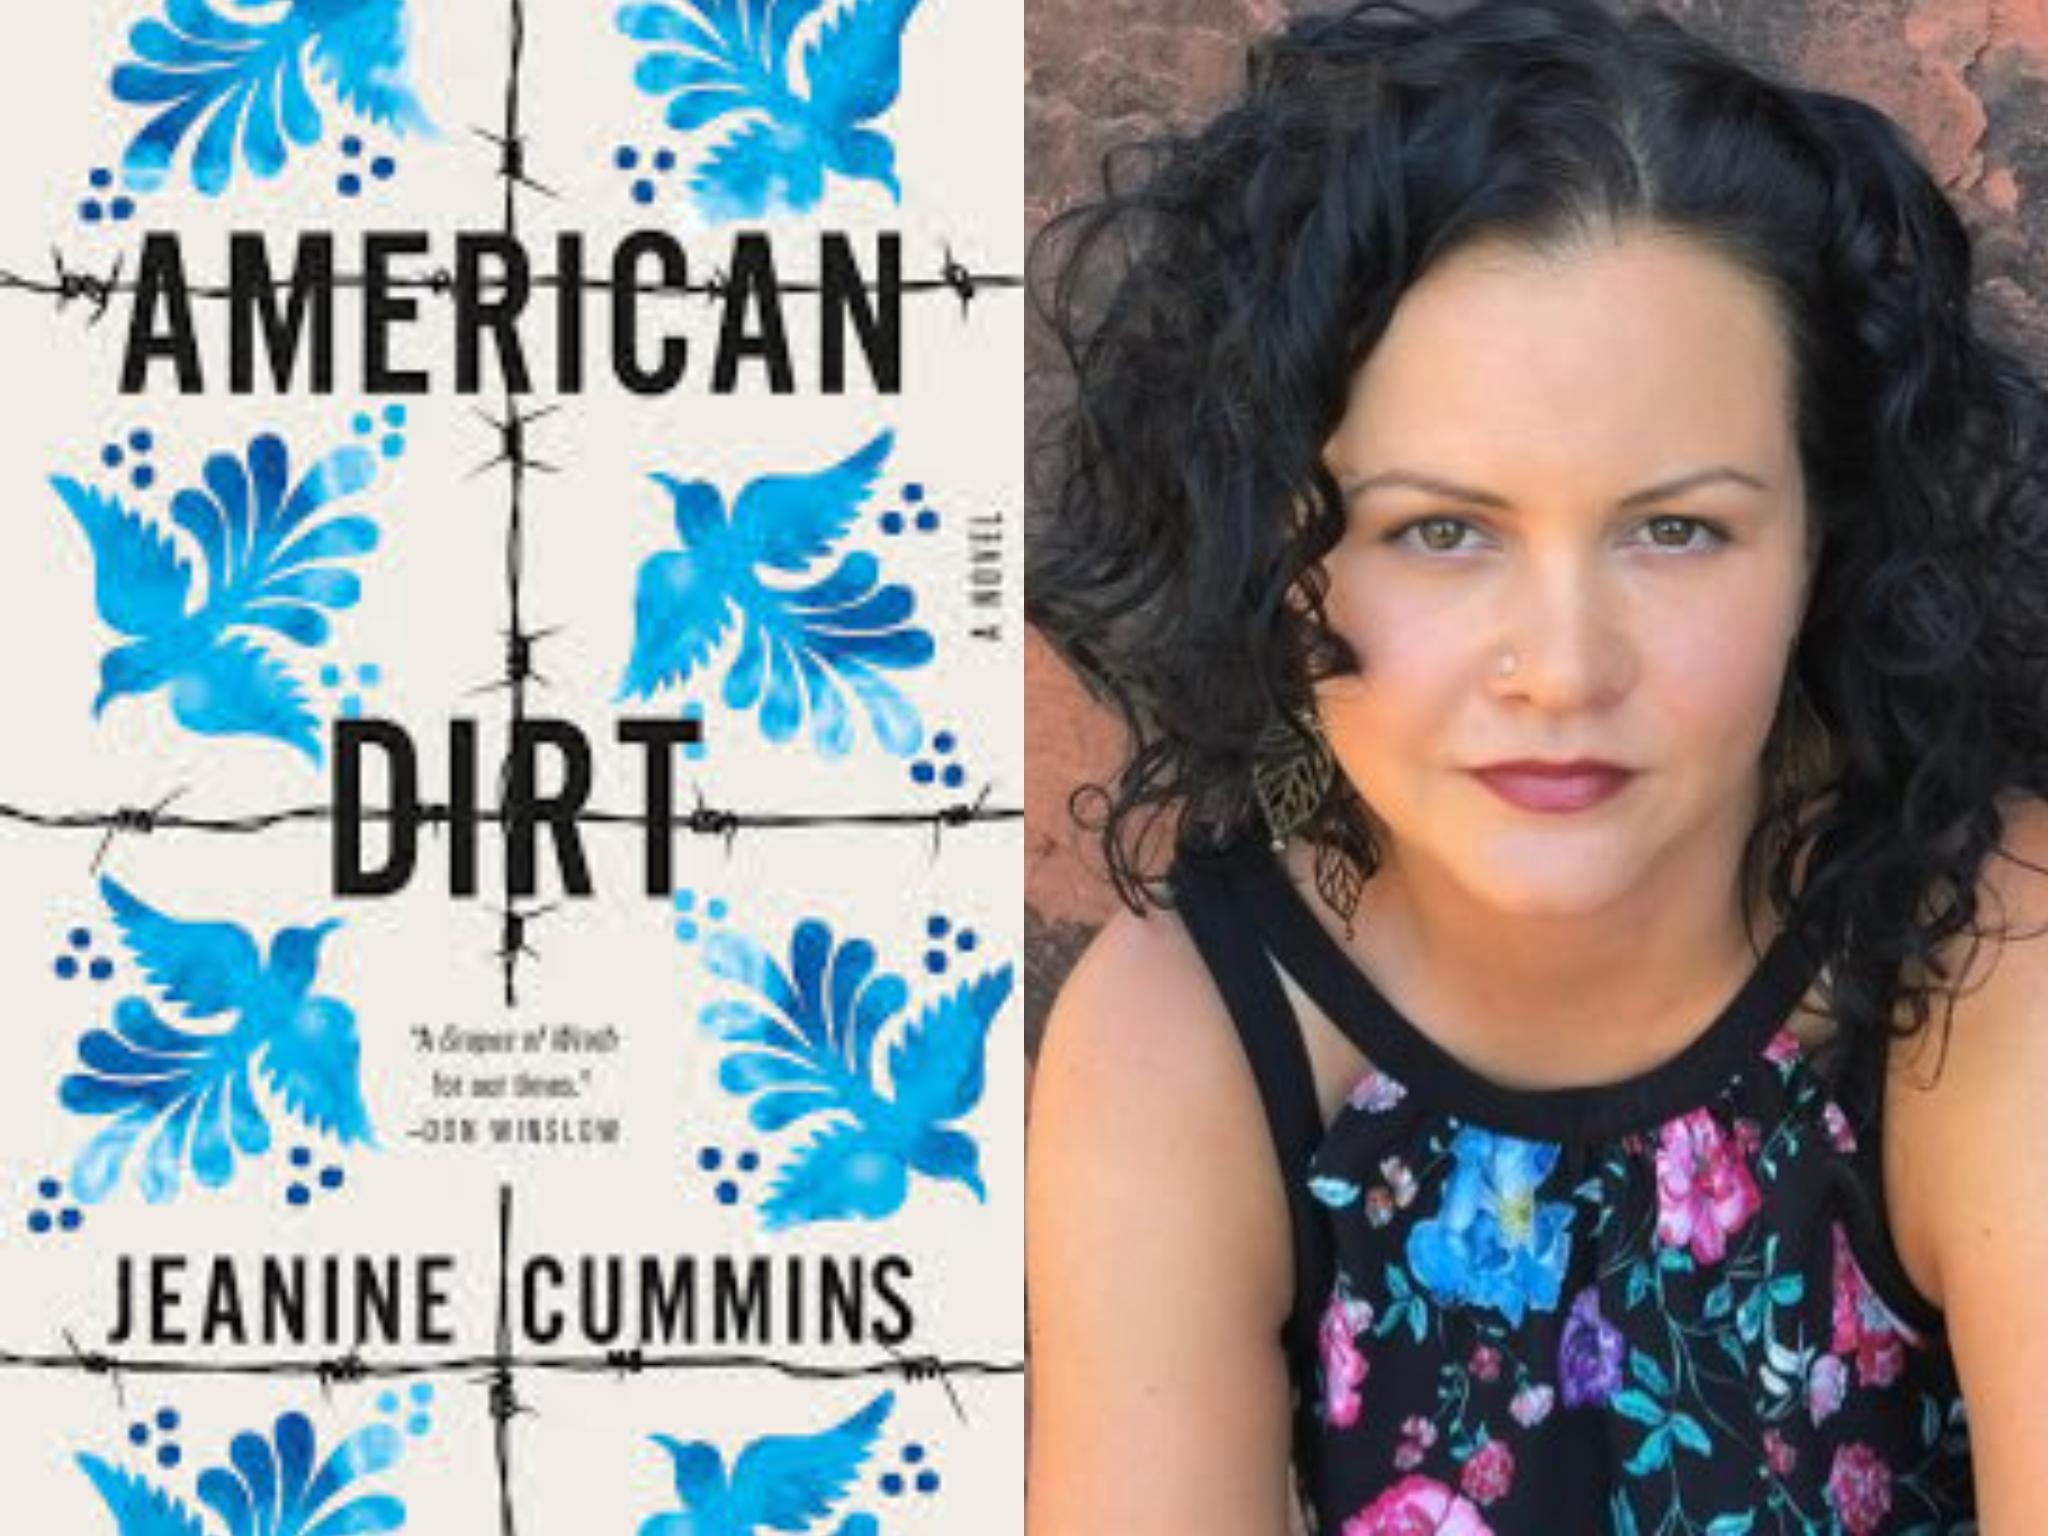 Jeanine Cummins’ ‘American Dirt’ is so much more than a simple thriller (Twitter)